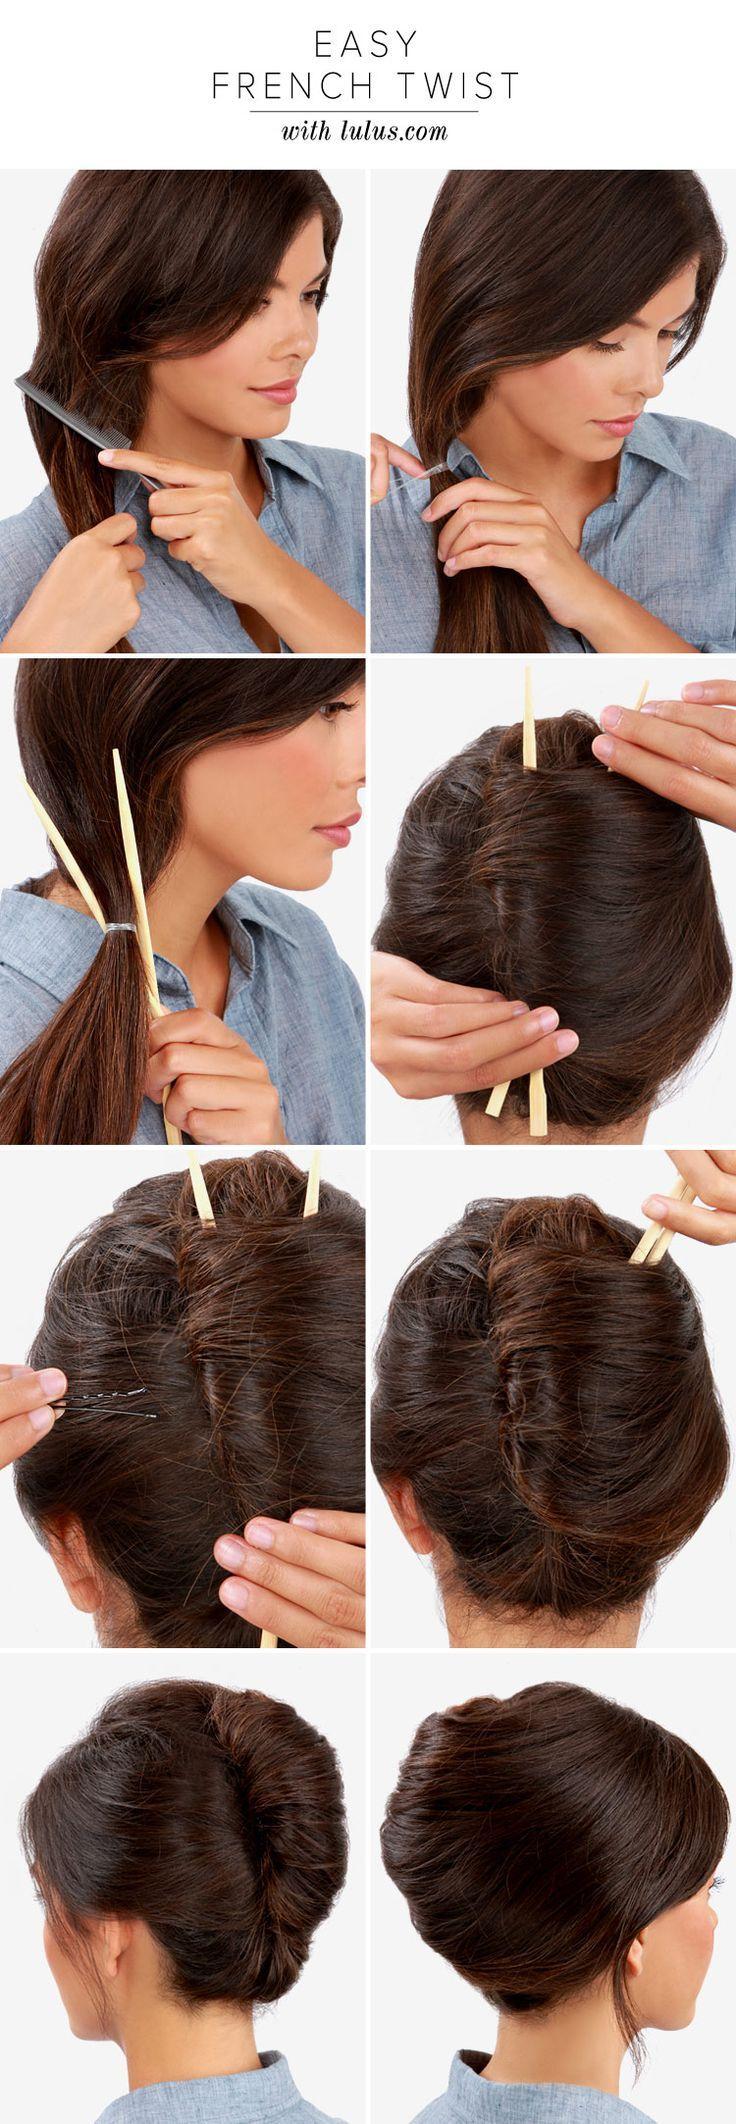 Hochzeit - If You've Ever Wondered How To Achieve The Perfect French Twist We Have Just The Guide For You! Check Out How To Use Chopsticks To Create This Chic Look!